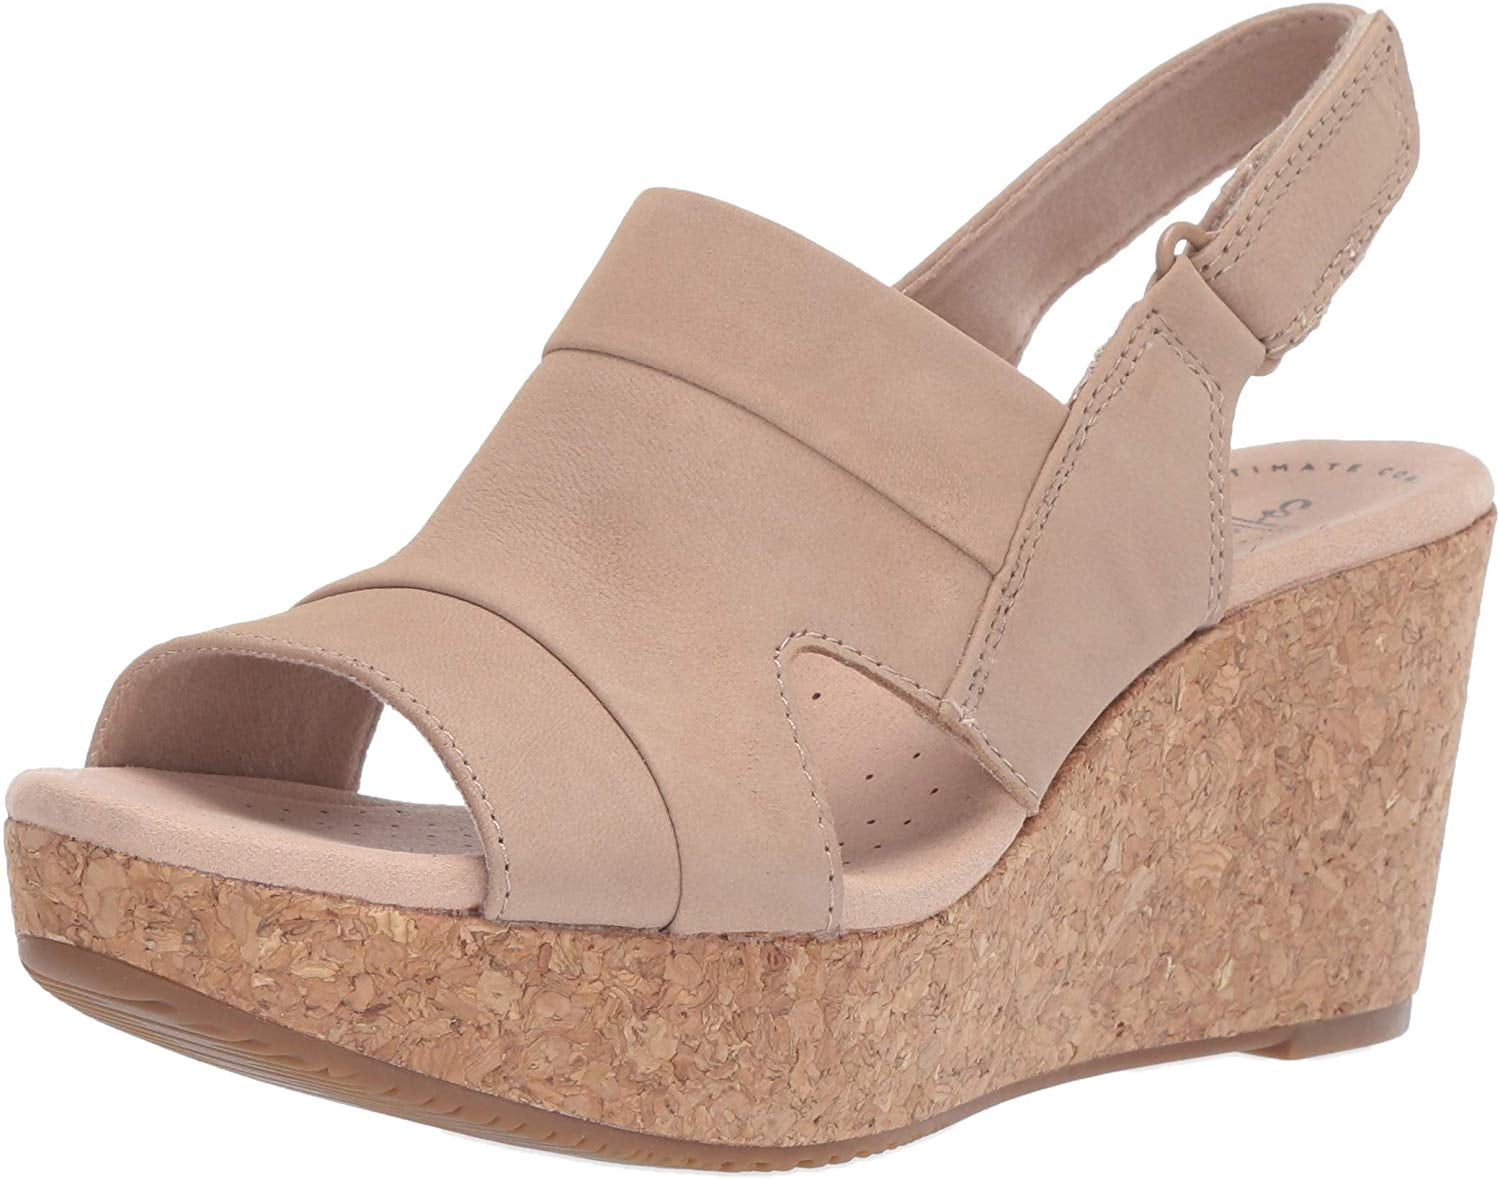 clarks collection women's annadel ivory wedge sandals